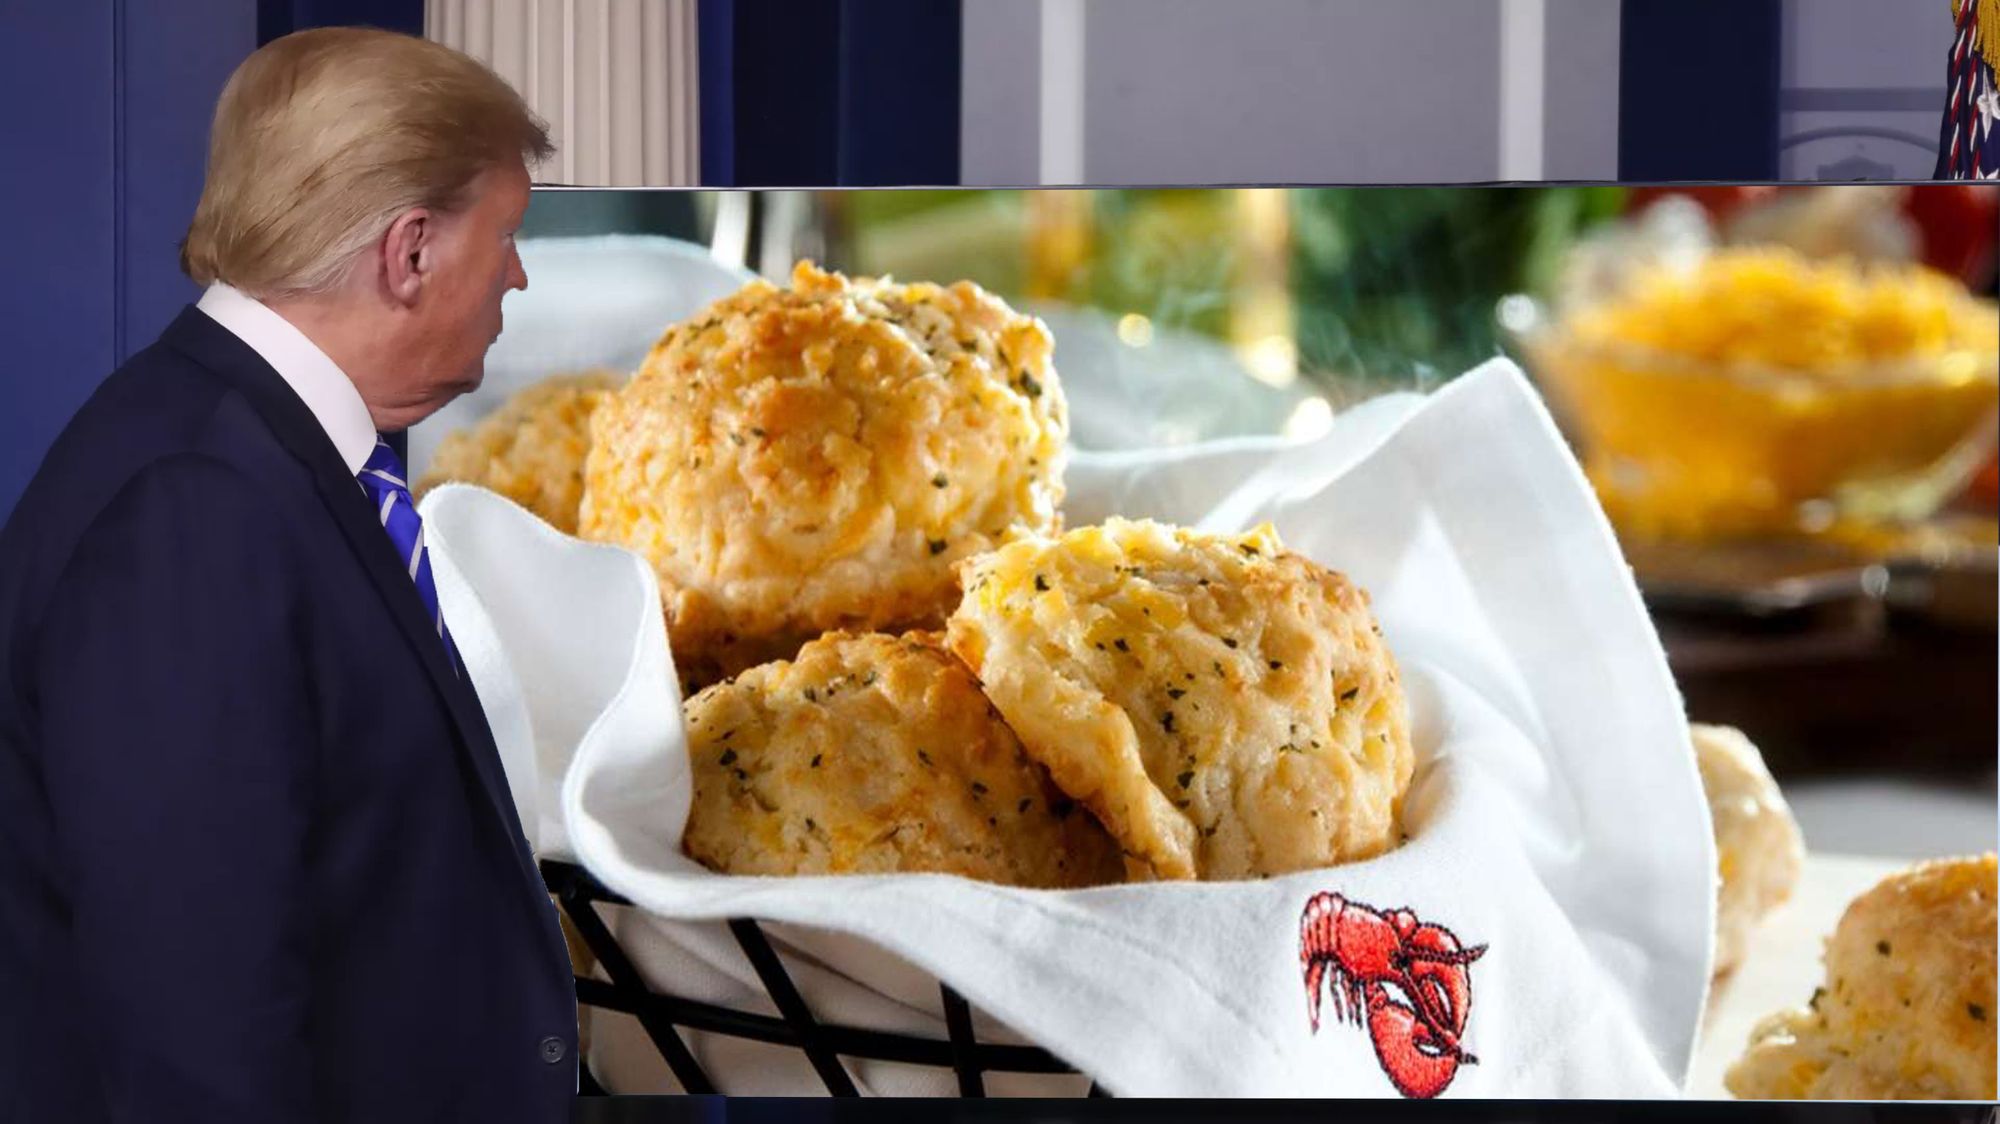 Report: Trump Suggests Injecting Red Lobster Biscuits To Cure COVID-19